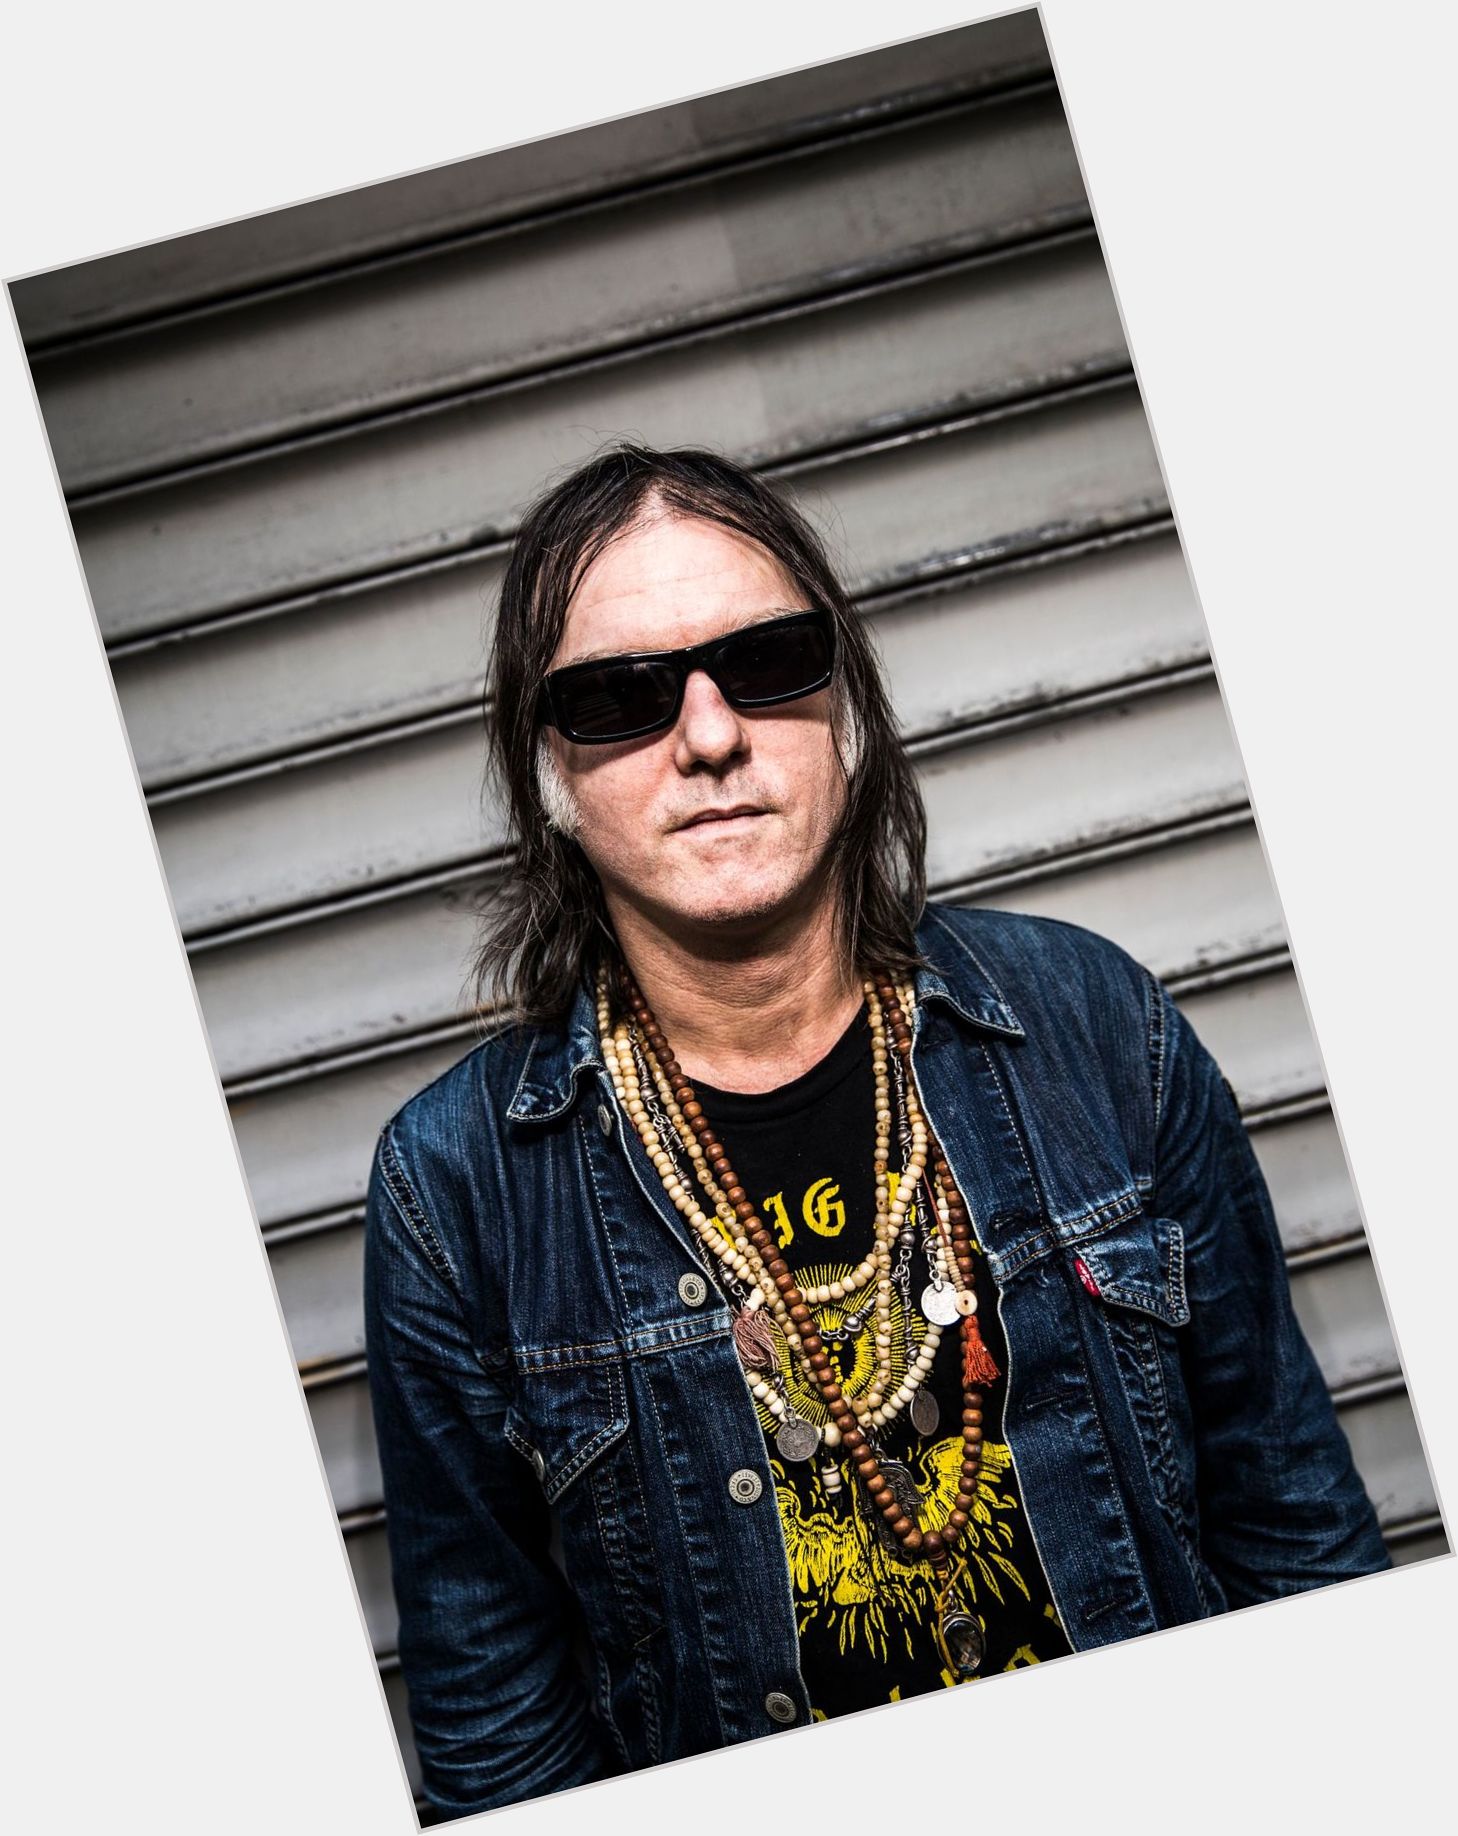 Https://fanpagepress.net/m/A/Anton Newcombe Dating 3